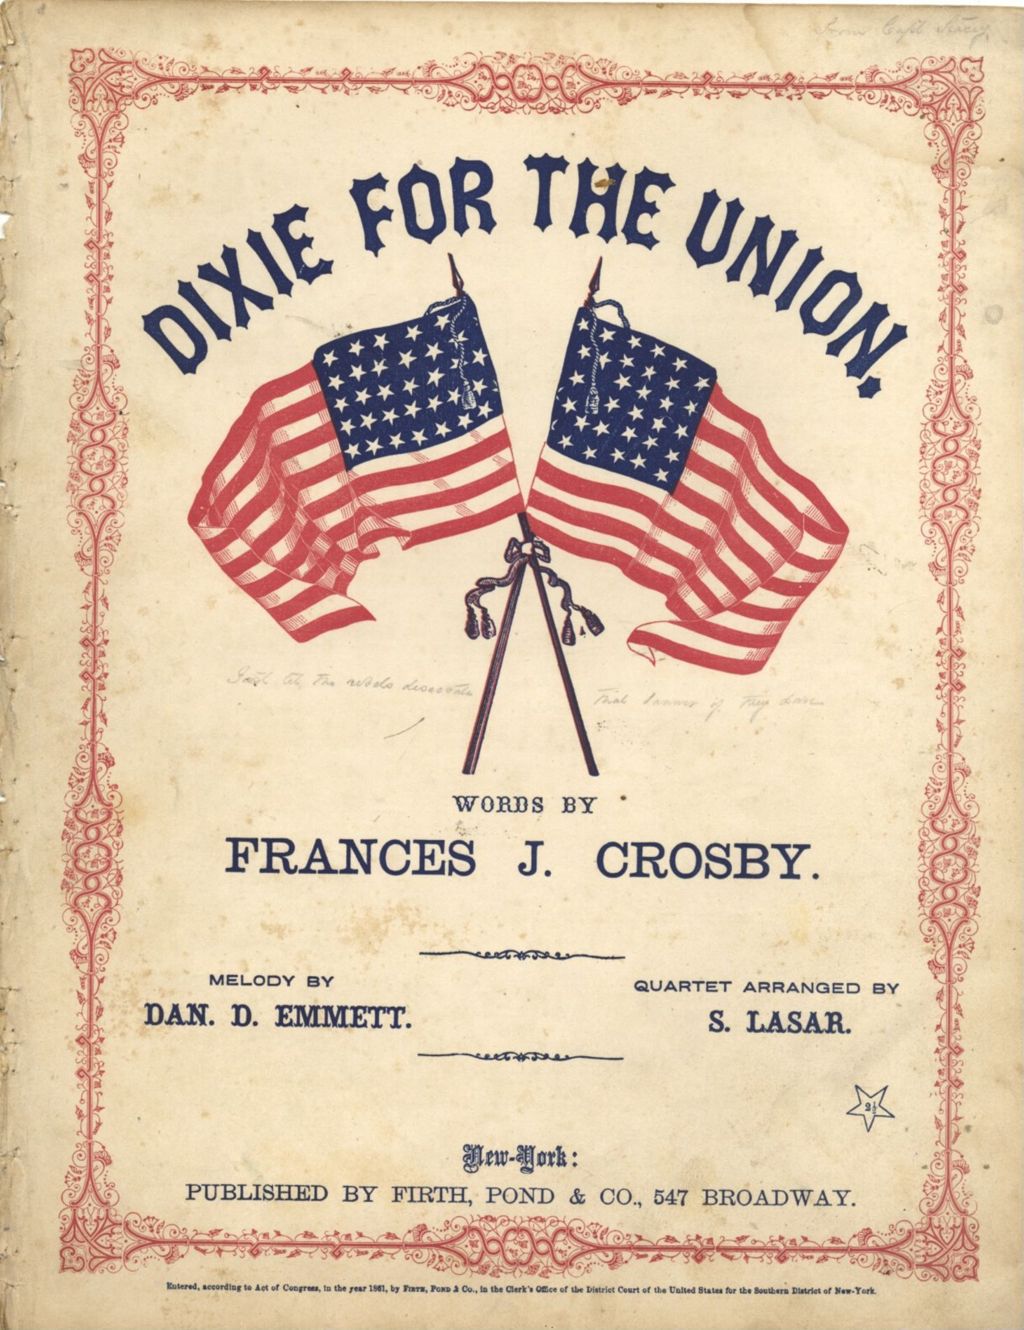 Dixie For The Union